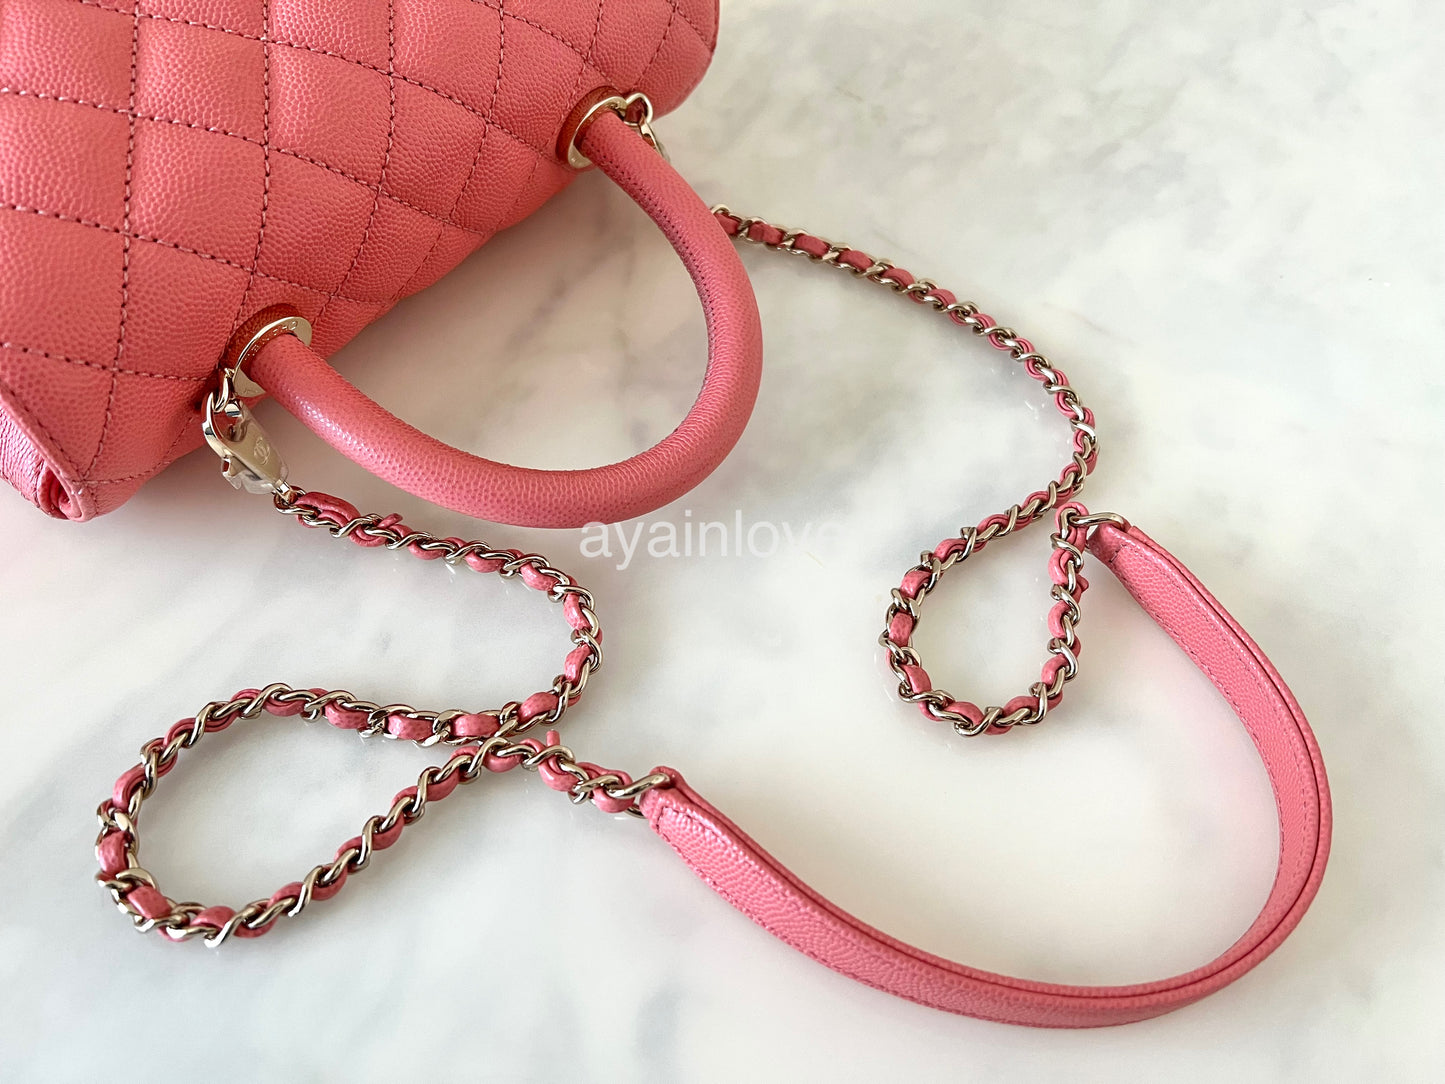 CHANEL 22A Pink Caviar Small 24cm Coco Handle Bag Light Gold Hardware